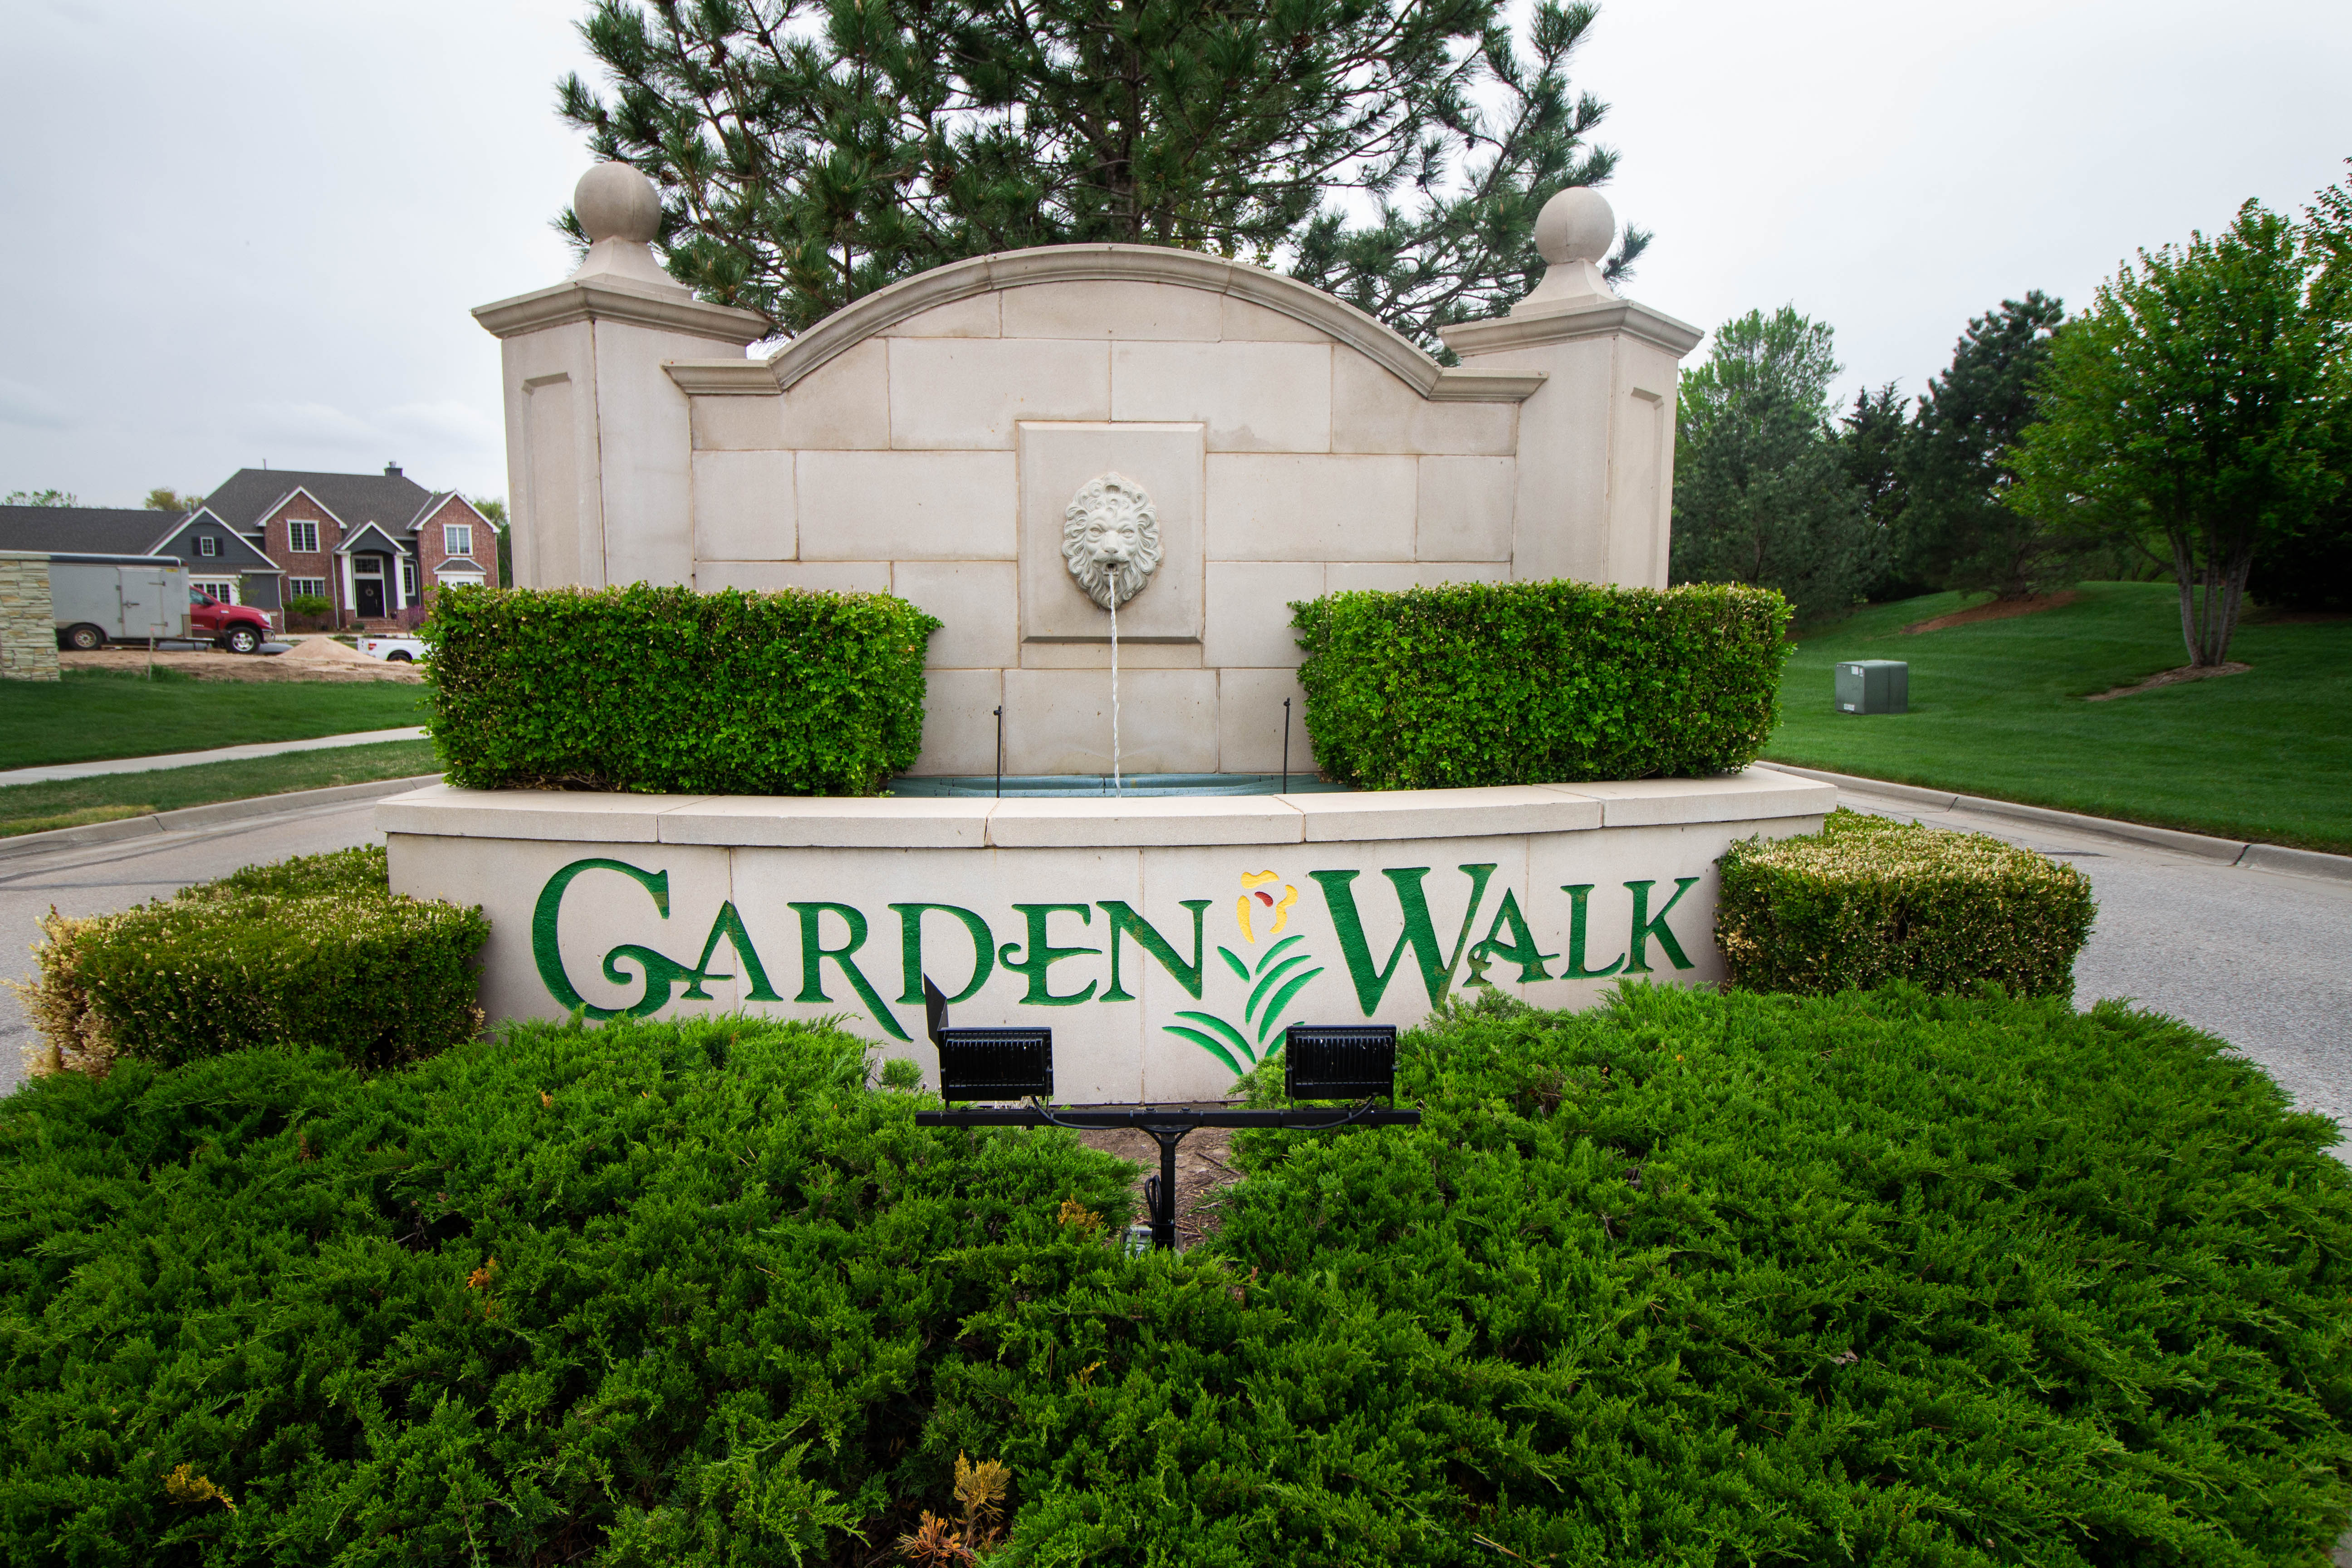 Sign at the entrance of the Garden Walk subdivision